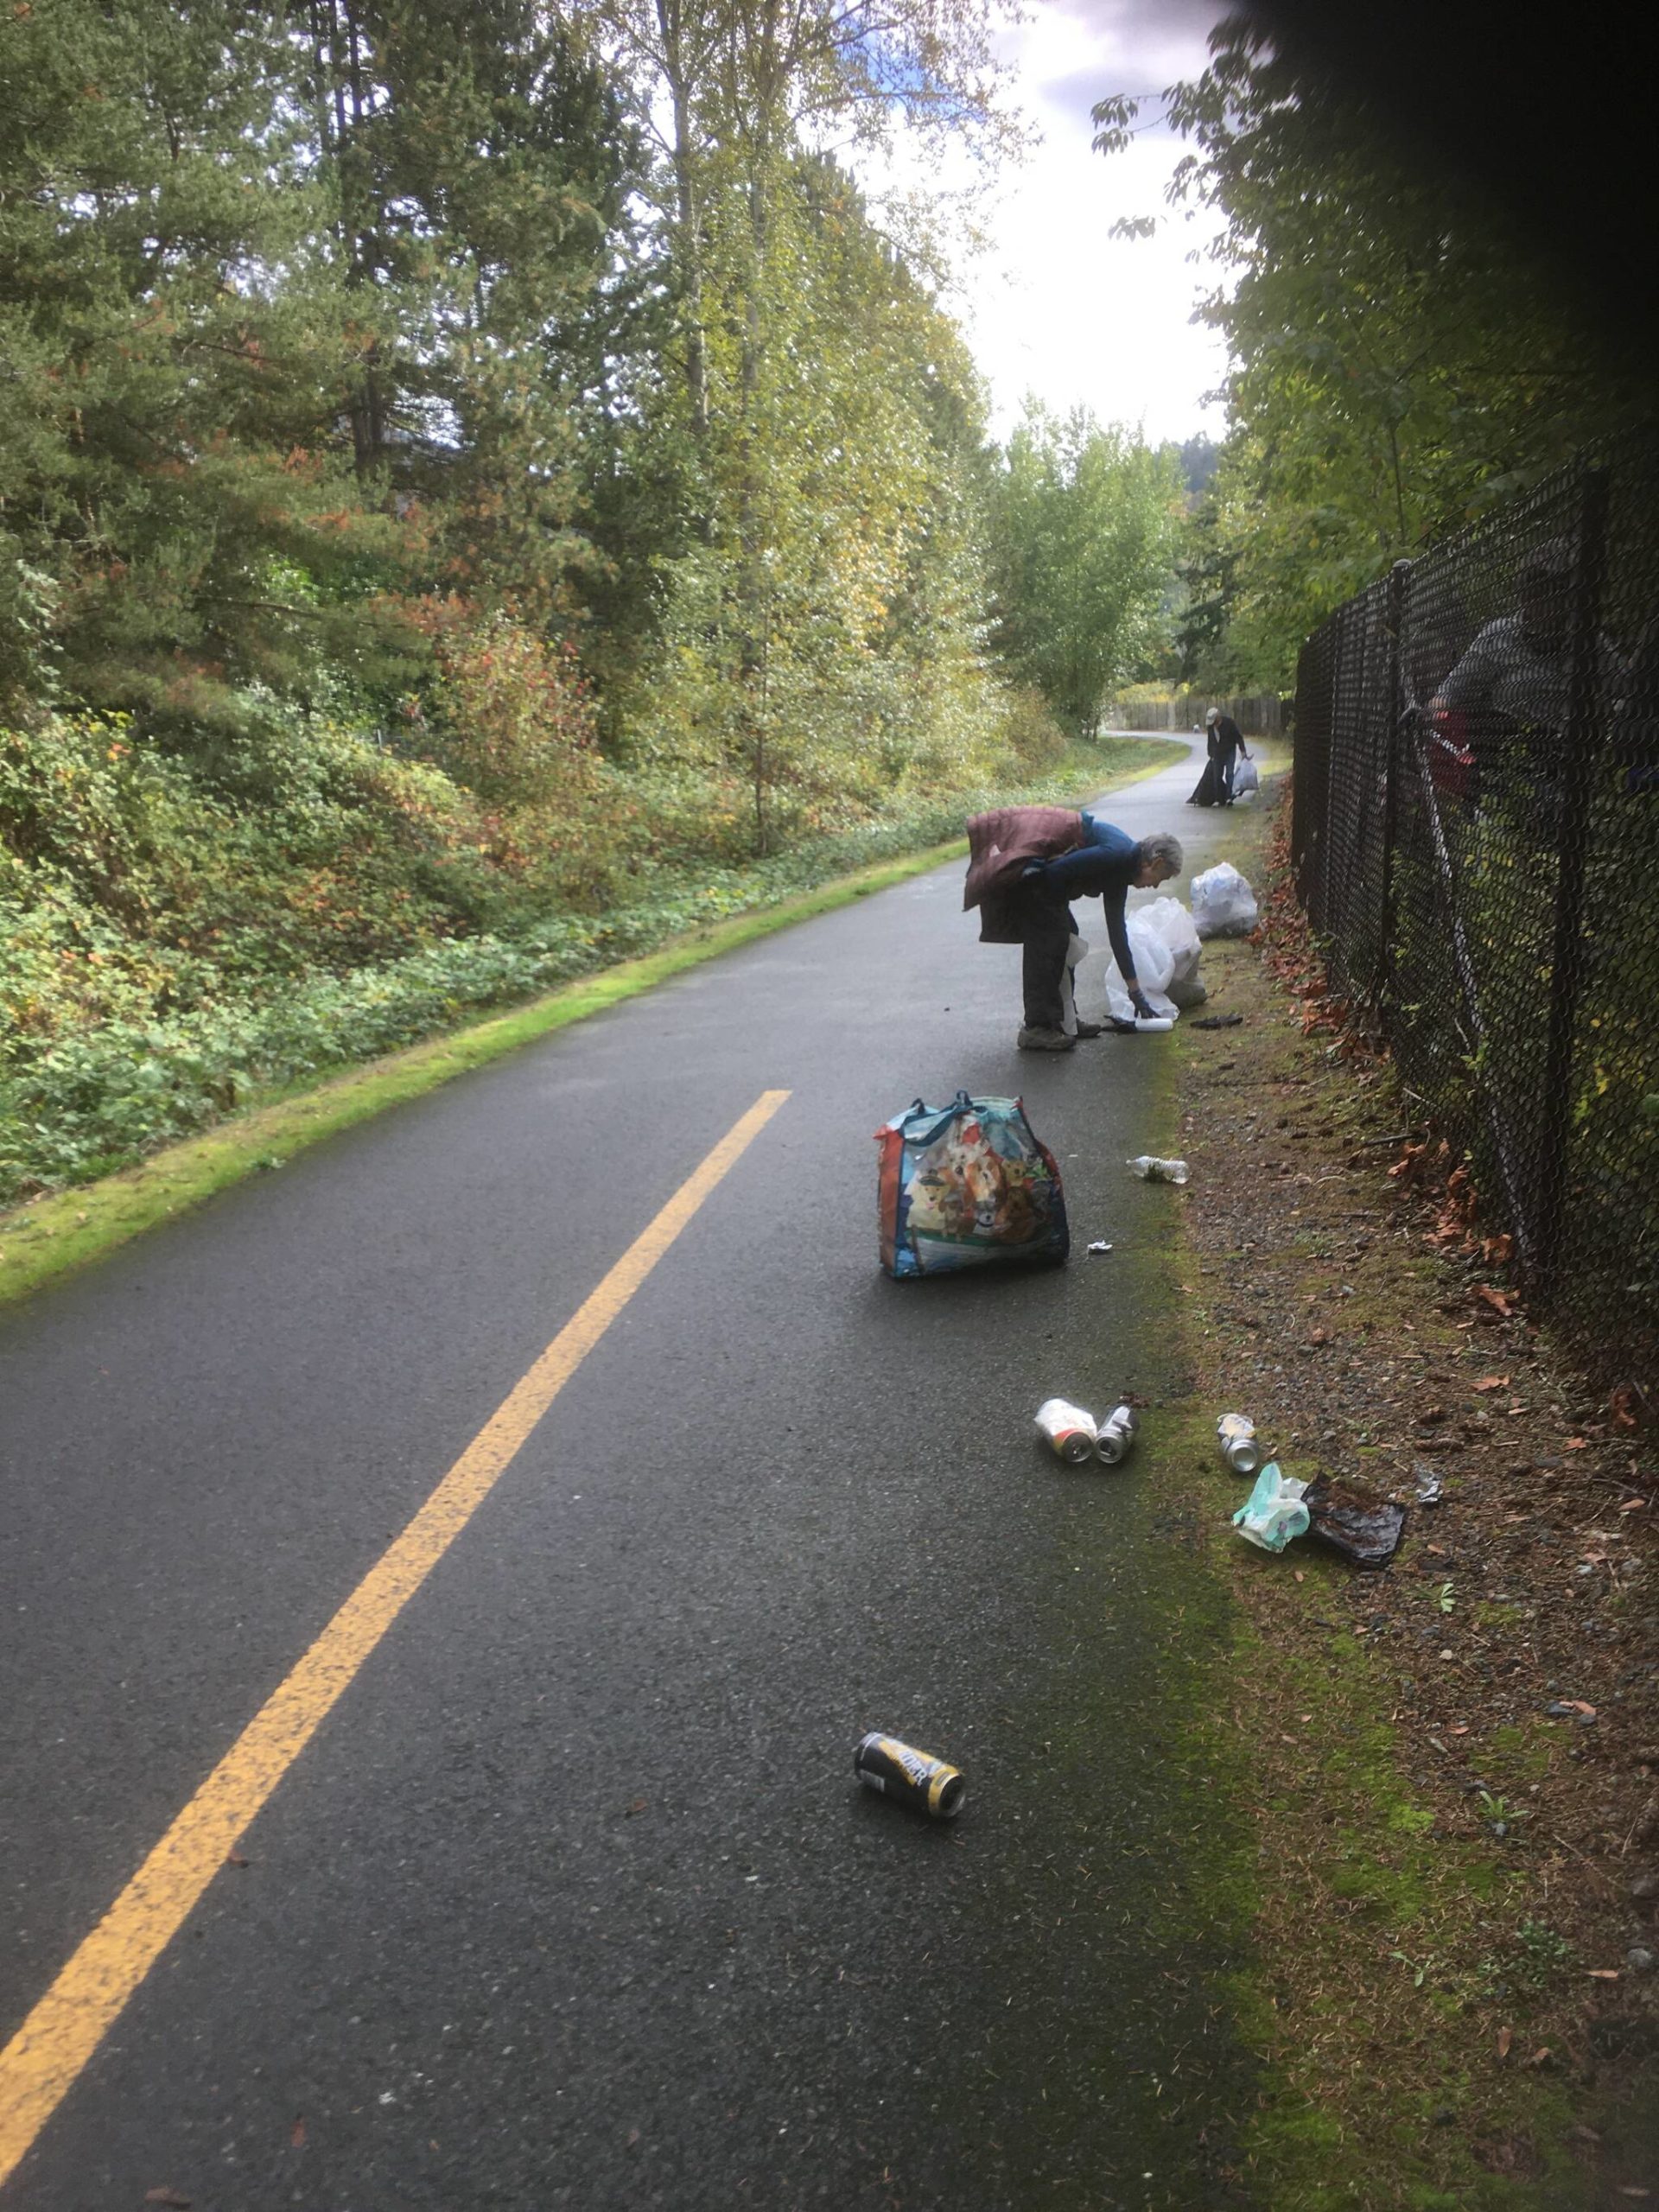 Rotary Club of Mercer Island members equipped with gloves, boots, bags and determination worked together to clean up a section of the Issaquah-Preston Trail on Oct. 16. The afternoon’s effort was all part of the club’s “Planet Earth Committee” that focuses on “minimizing the negative impacts of humanity on our earth and sending positive messages about respecting our environment. Truly dirty work for a good cause,” reads a Rotary project report. Courtesy photo